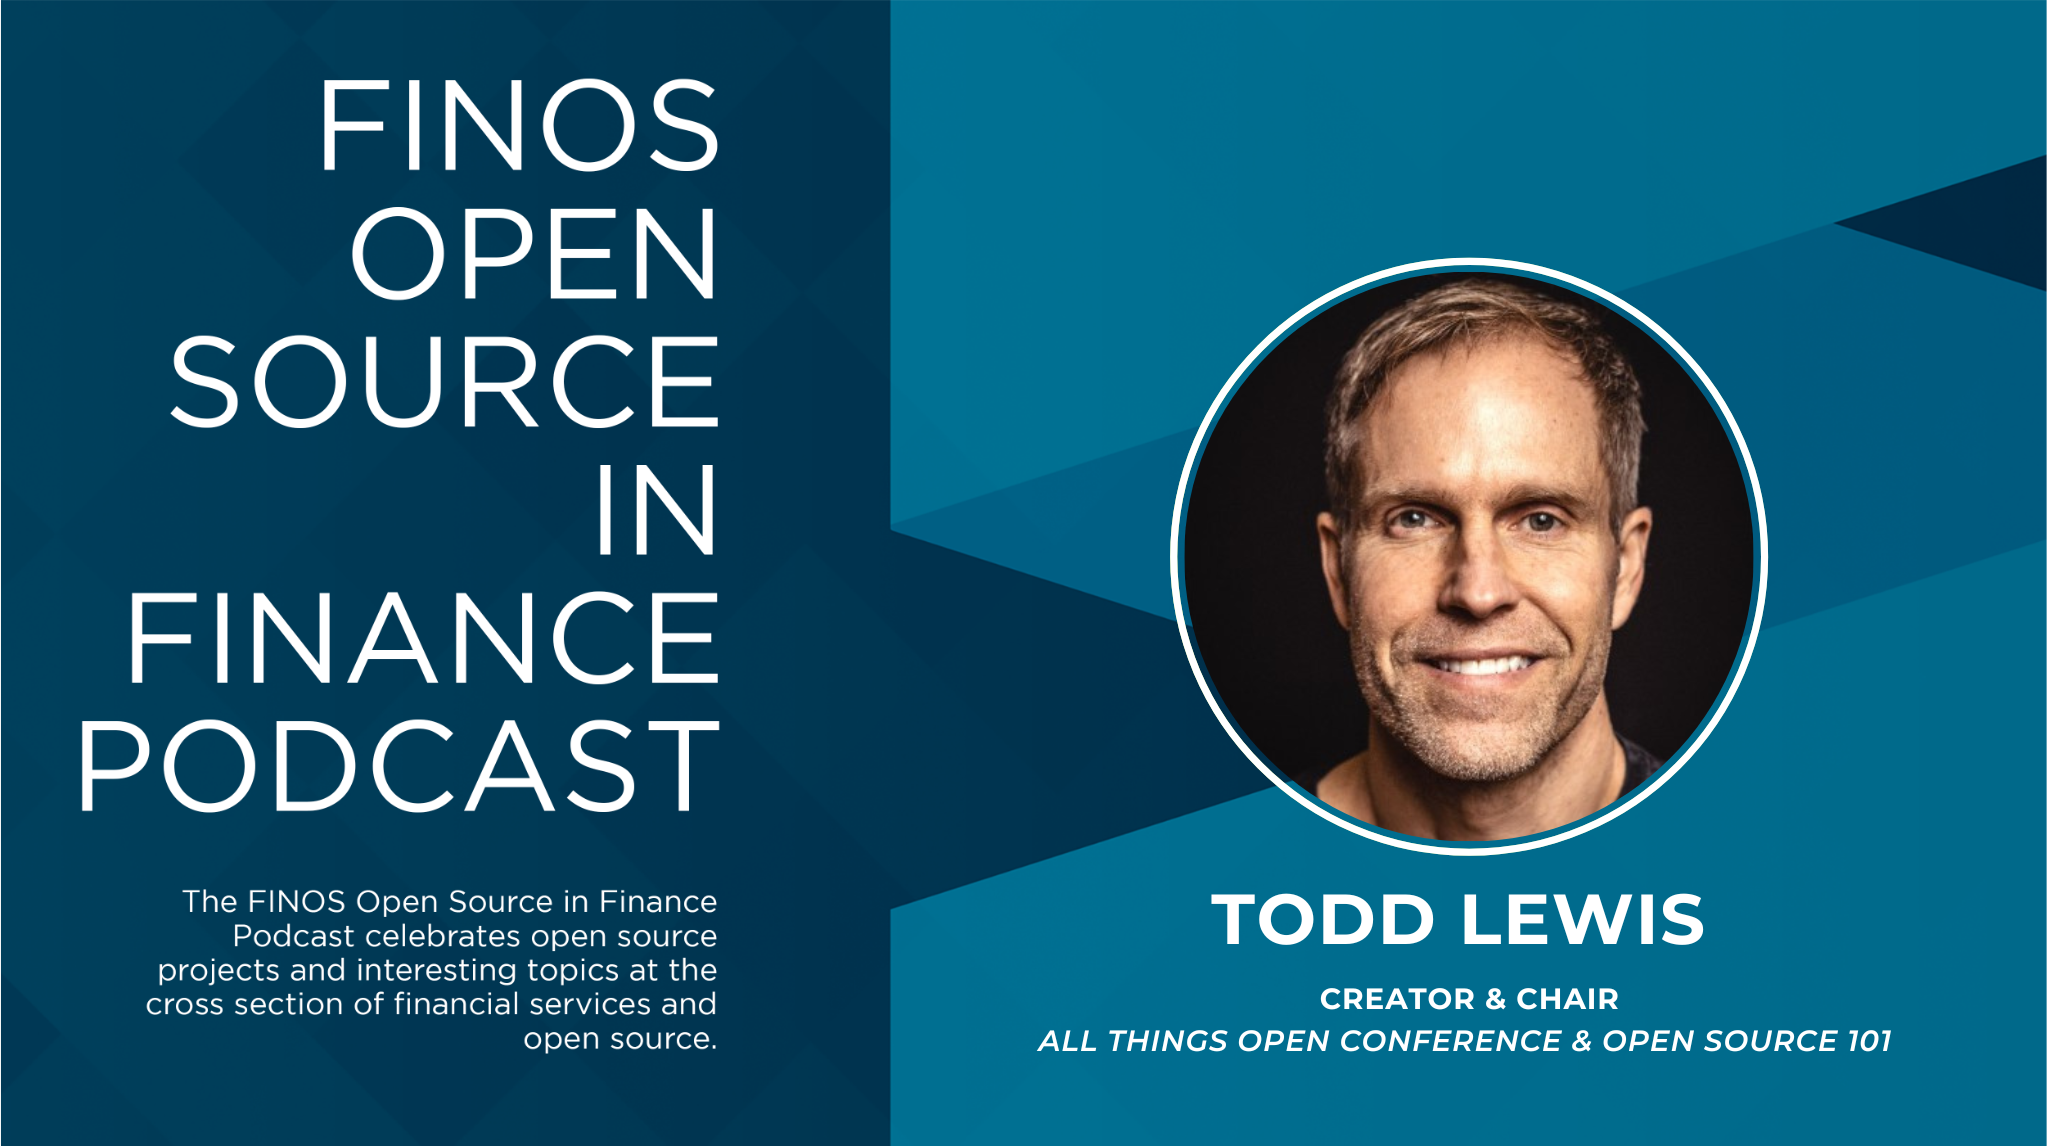 15 Years+ Open Source Conferences – Todd Lewis, All Things Open & Open Source 101 Conferences